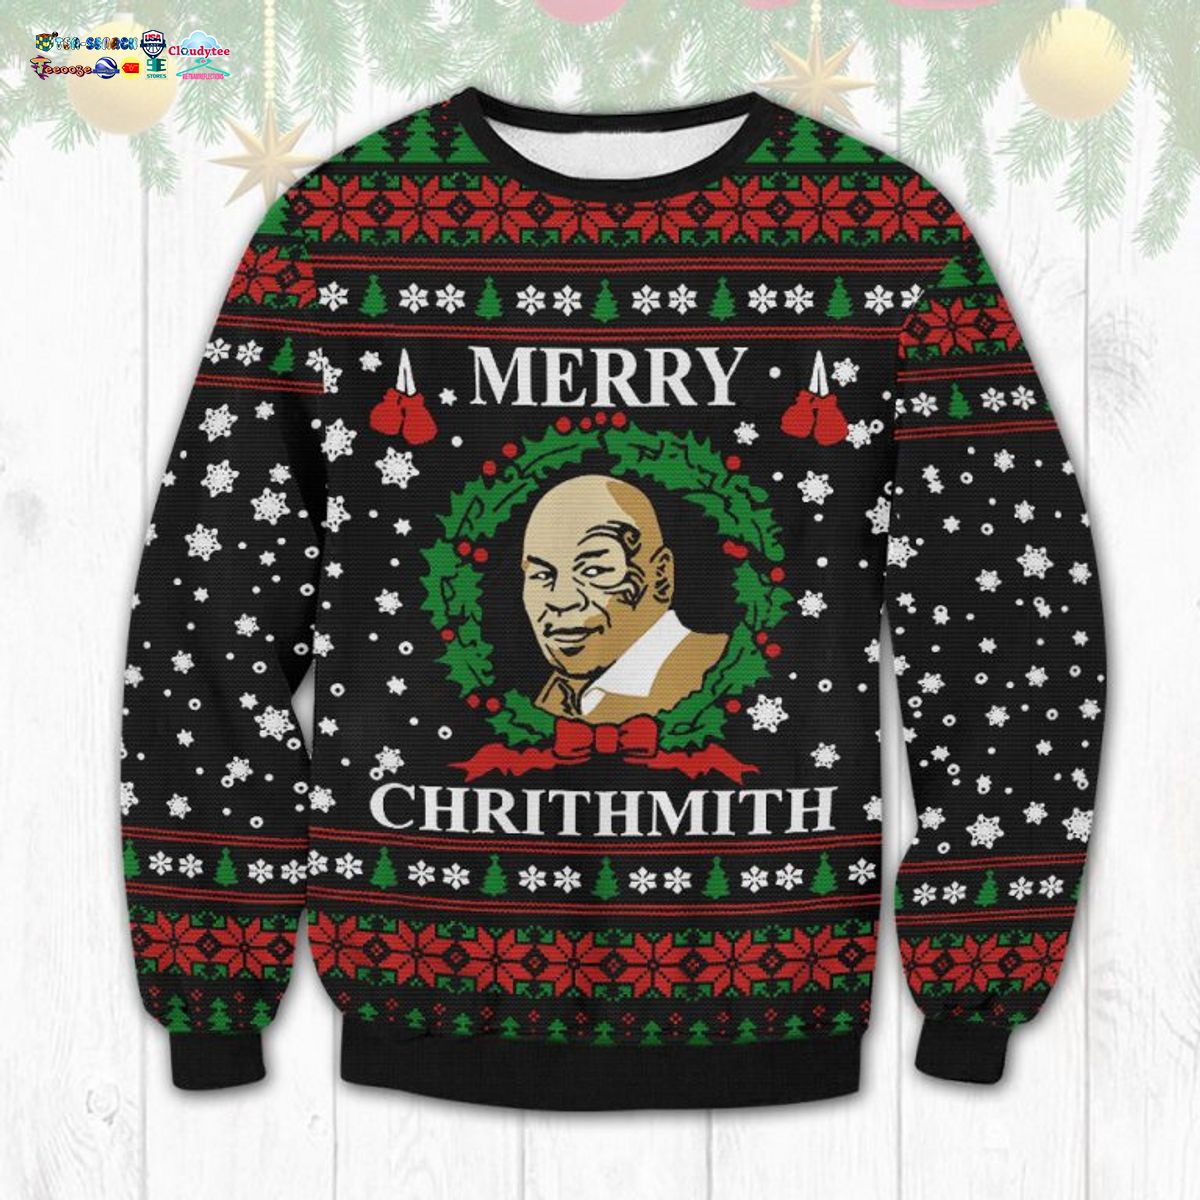 Mike Tyson Merry Chrithmith Ugly Christmas Sweater - Rocking picture